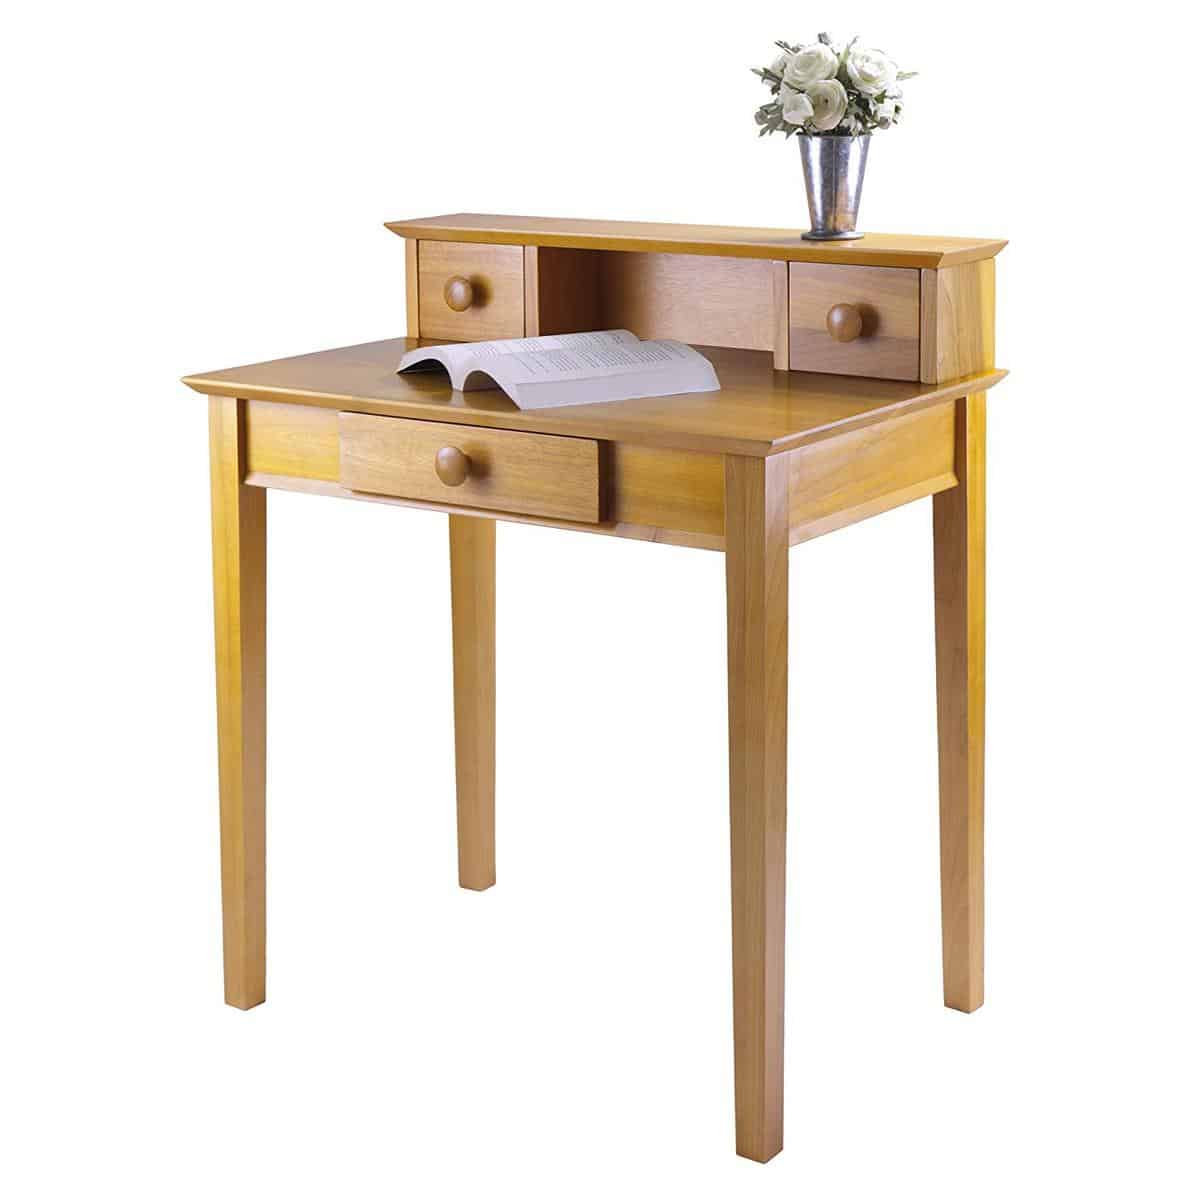 Get that Vintage Look with This Winsome Wood Desk